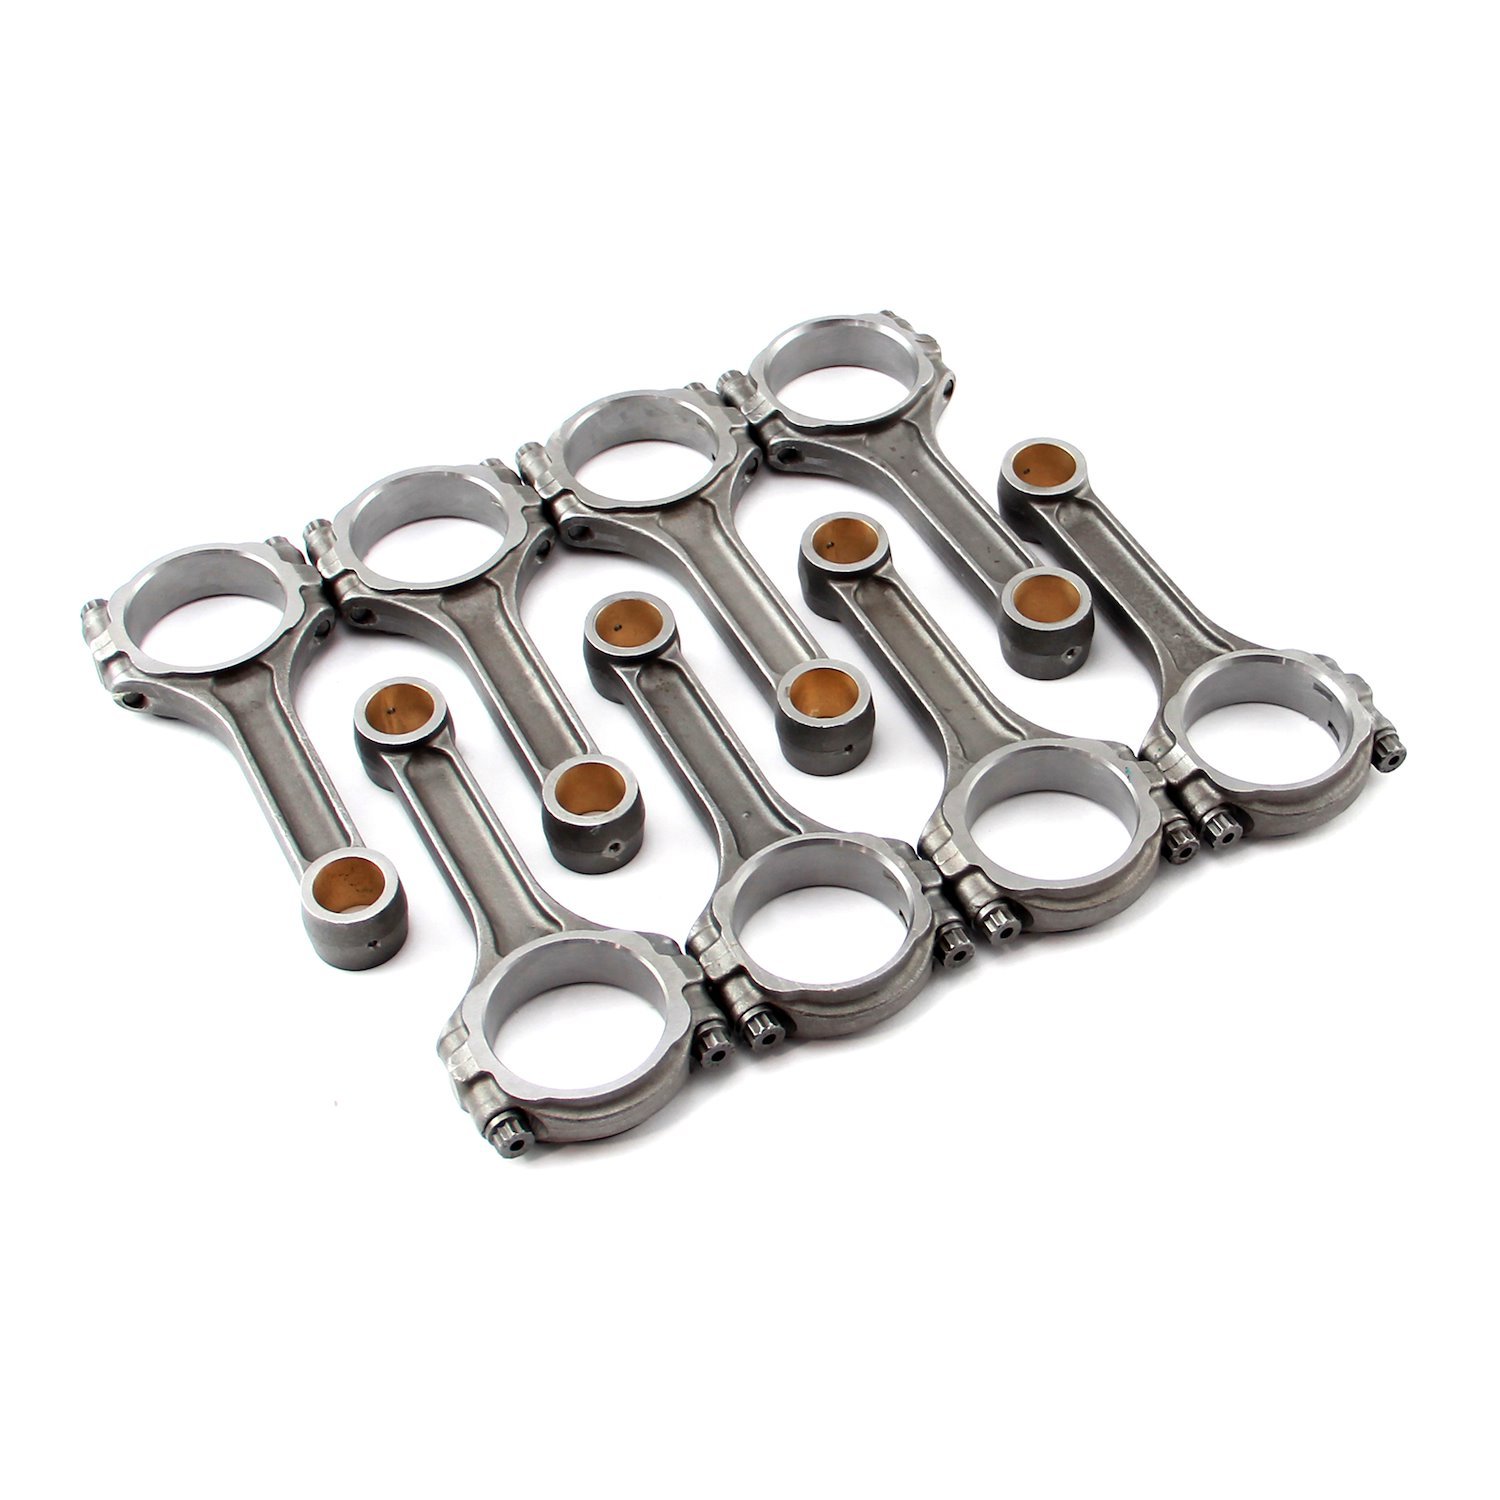 PCE274.1020 I-Beam Connecting Rod Set, Big Block Chevy 454, Length: 6.800 in.